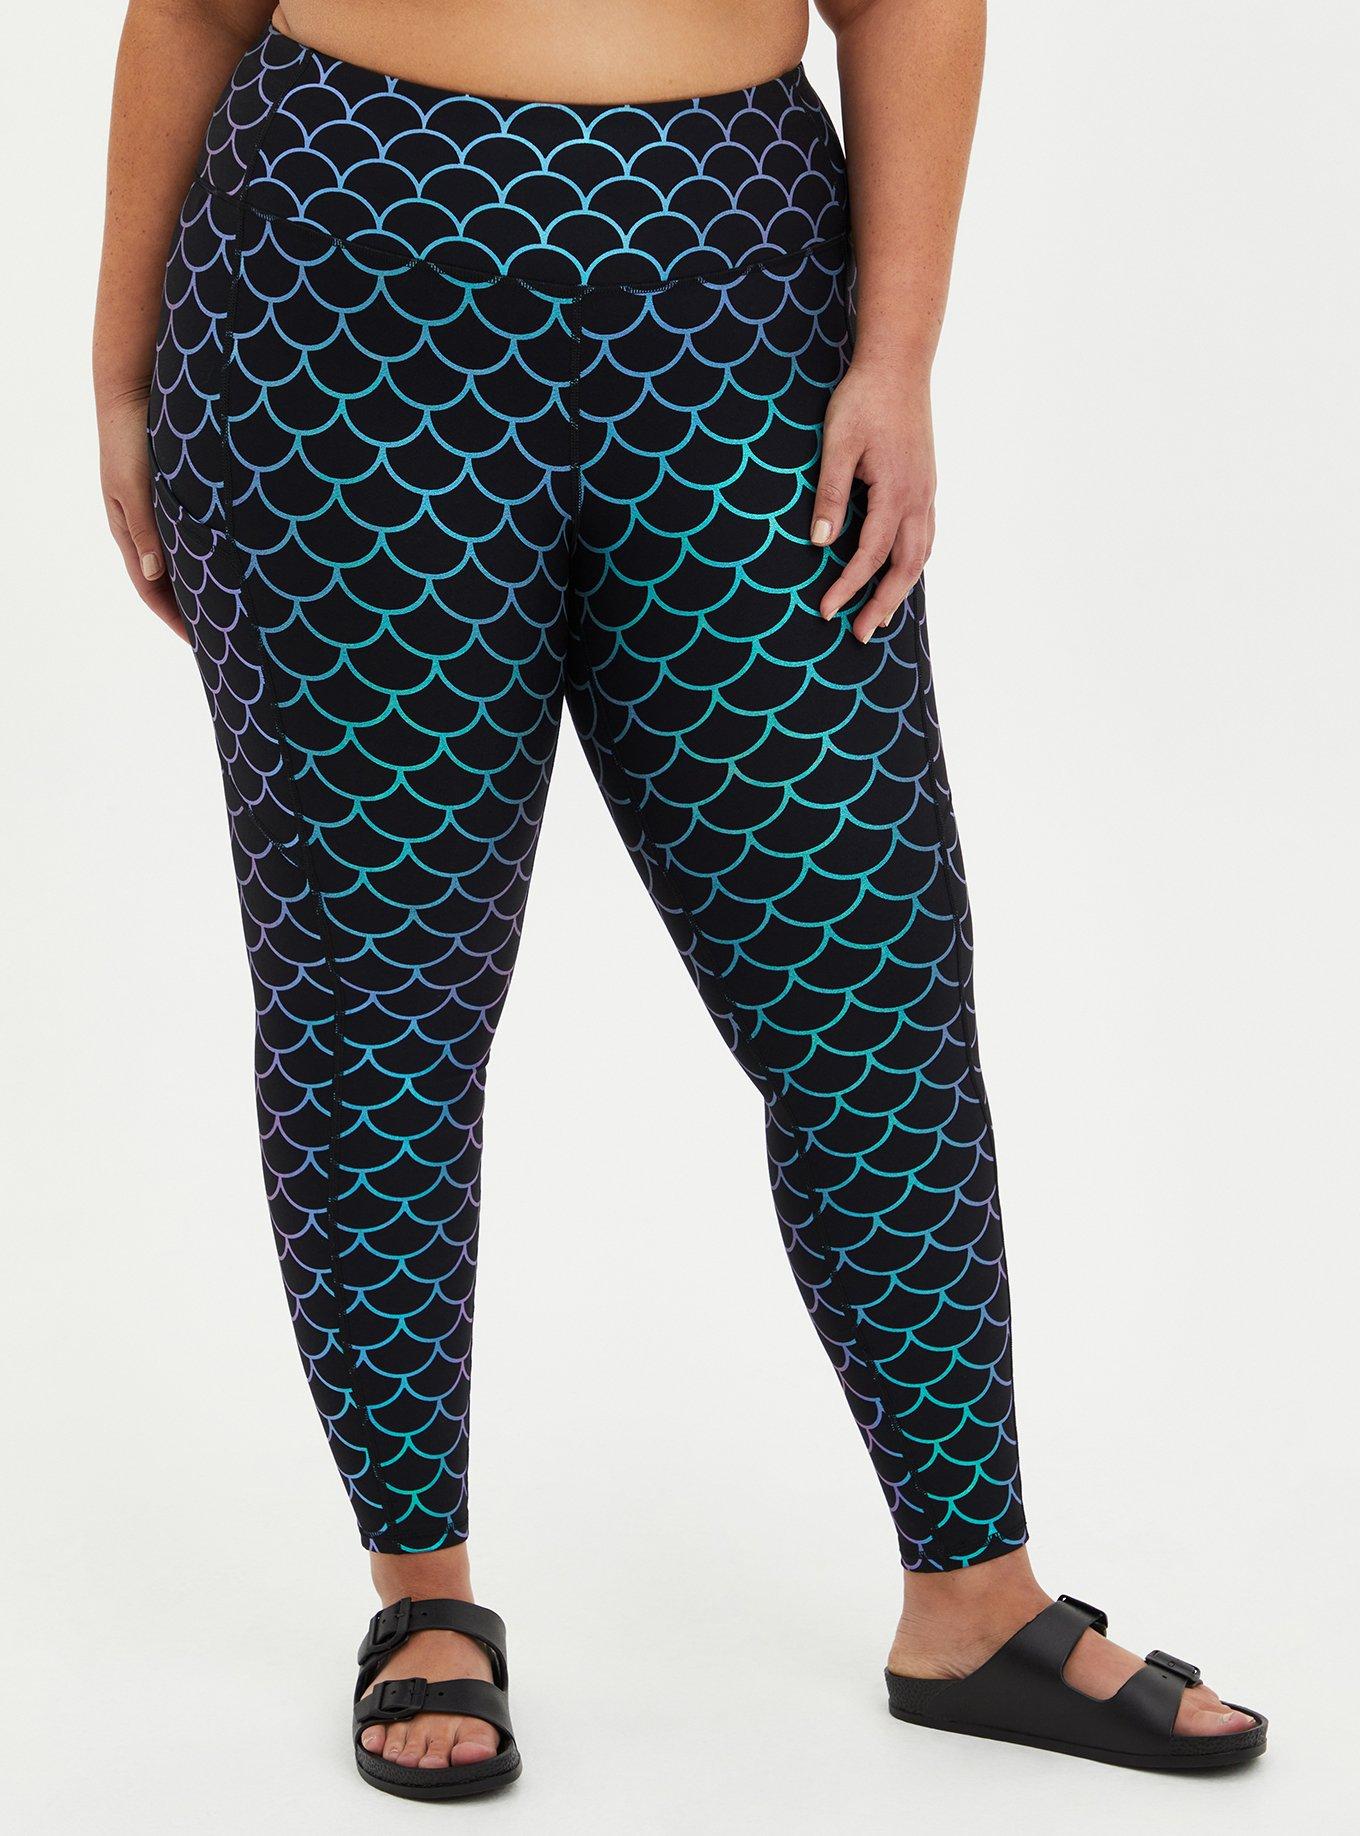 Plus Size - Performance Core Full Length Active Legging With Side